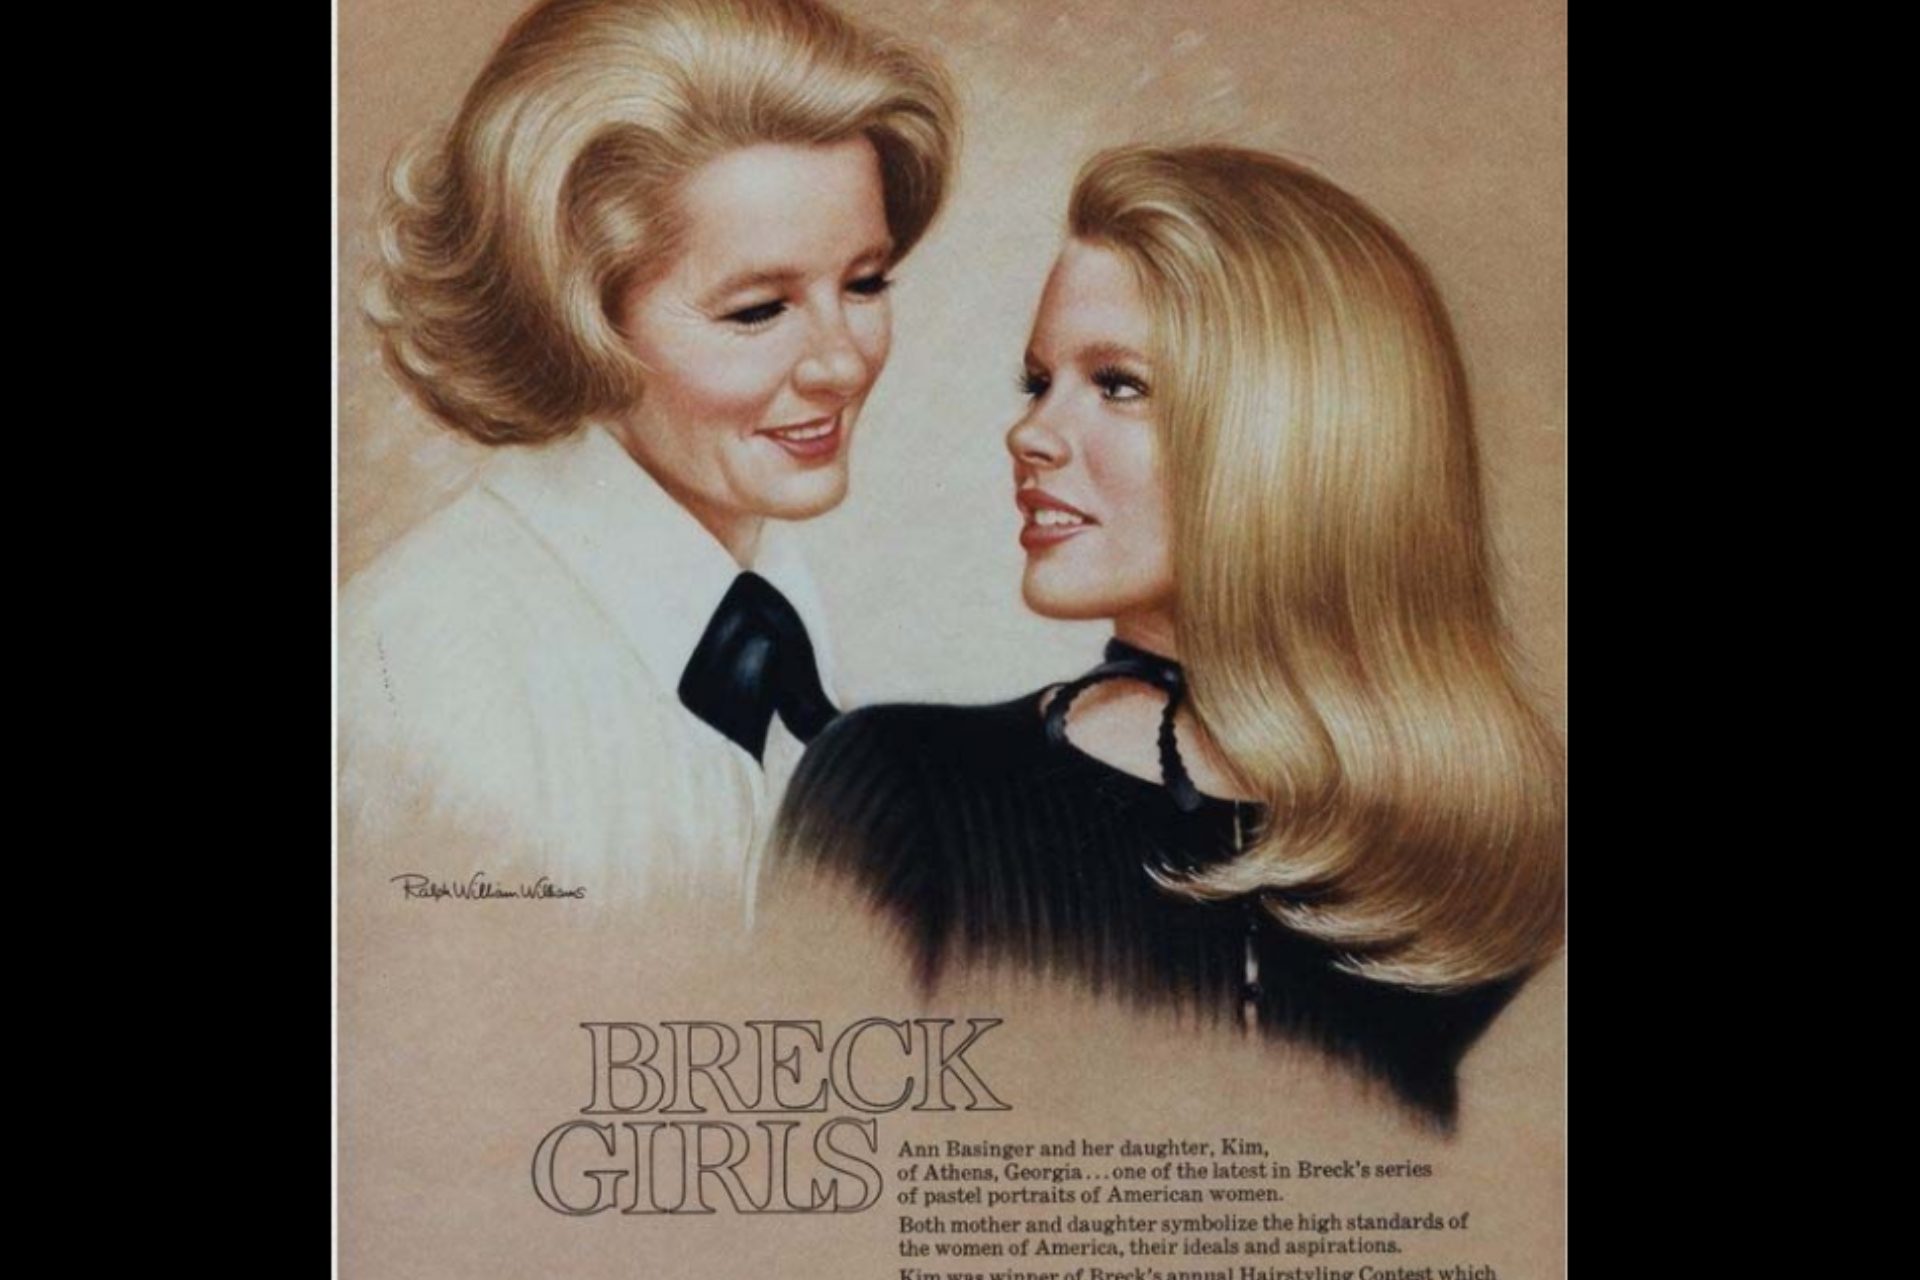 <p>Despite what she thought, her modeling career was a huge success. She was on the cover of great magazines like Vogue and appeared in hundreds of advertisements. She was most known as the “Breck Shampoo Girl," and here she appears for the brand alongside her mom.</p> <p>Image: Ralph William Williams & John H. Breck, Inc, 1972, via Wikimedia</p>